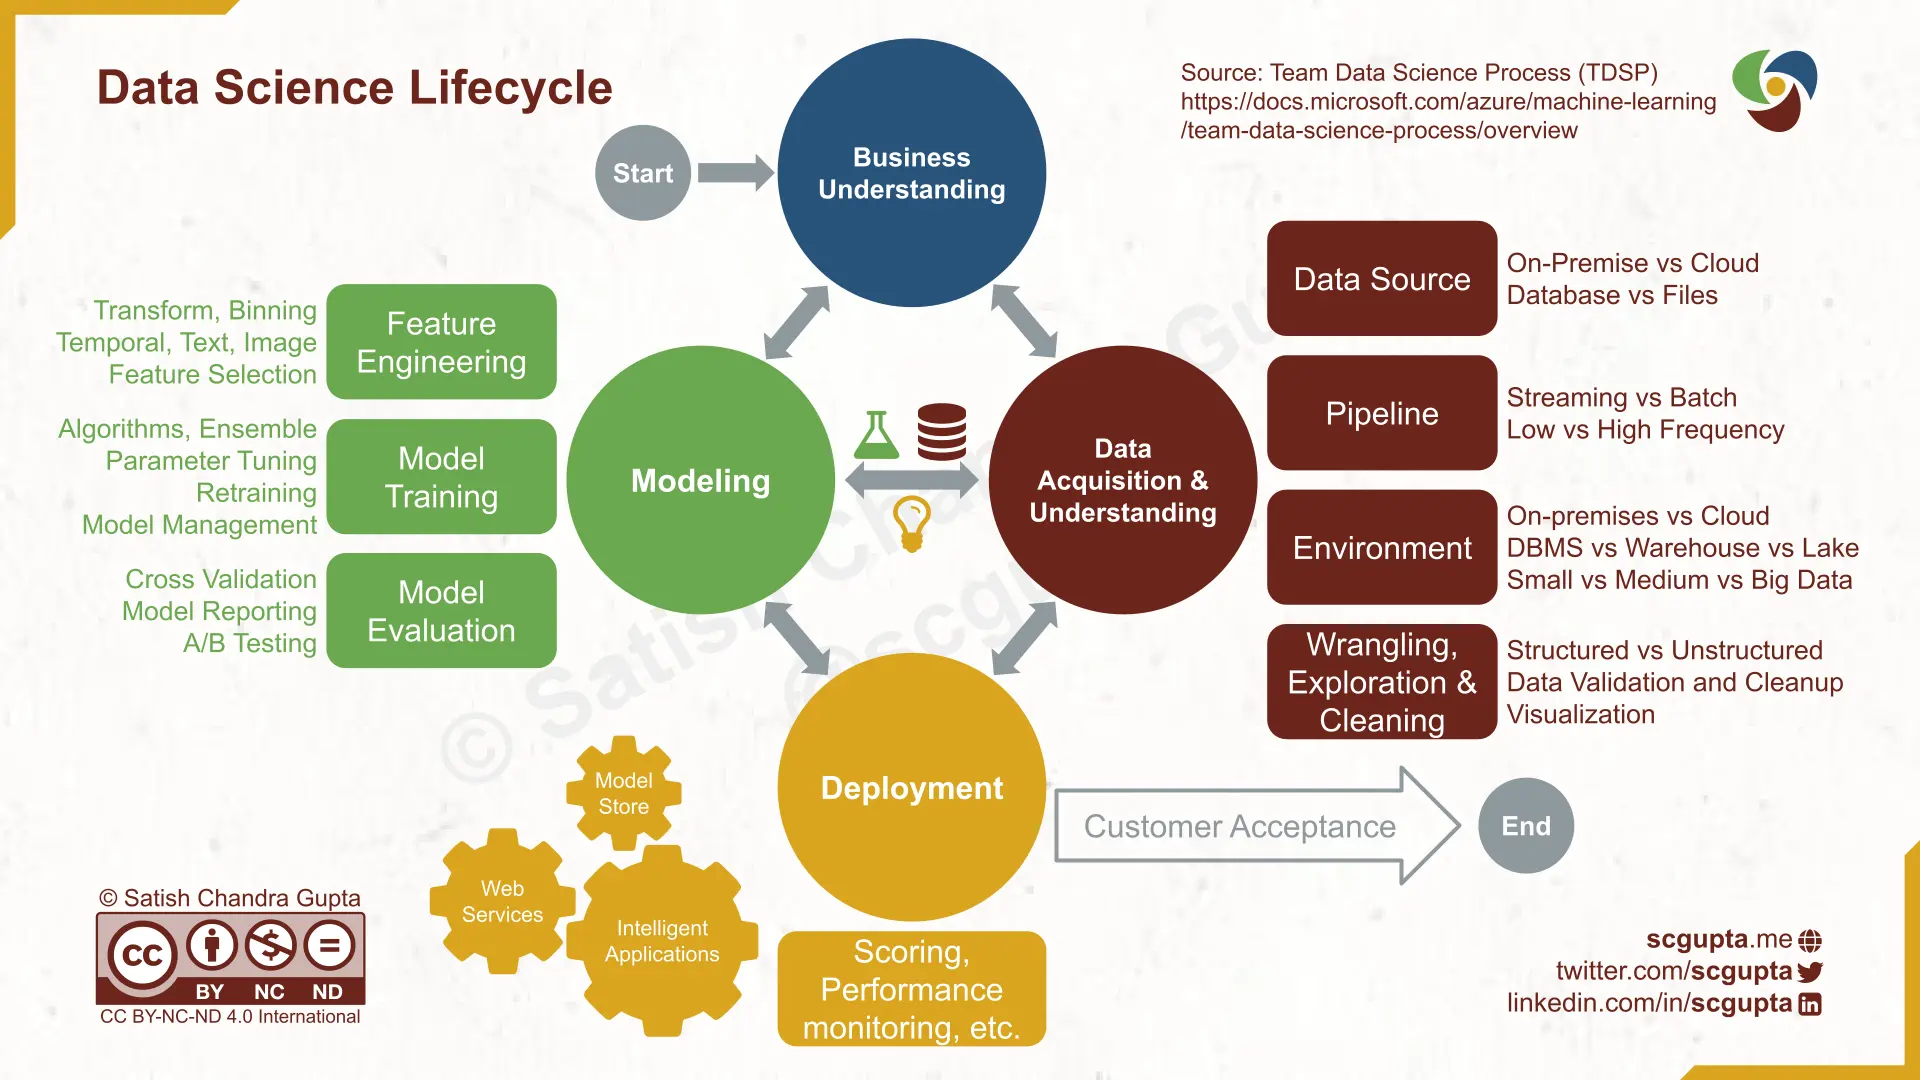 Microsoft's Team Data Science Process (TDSP) Lifecycle